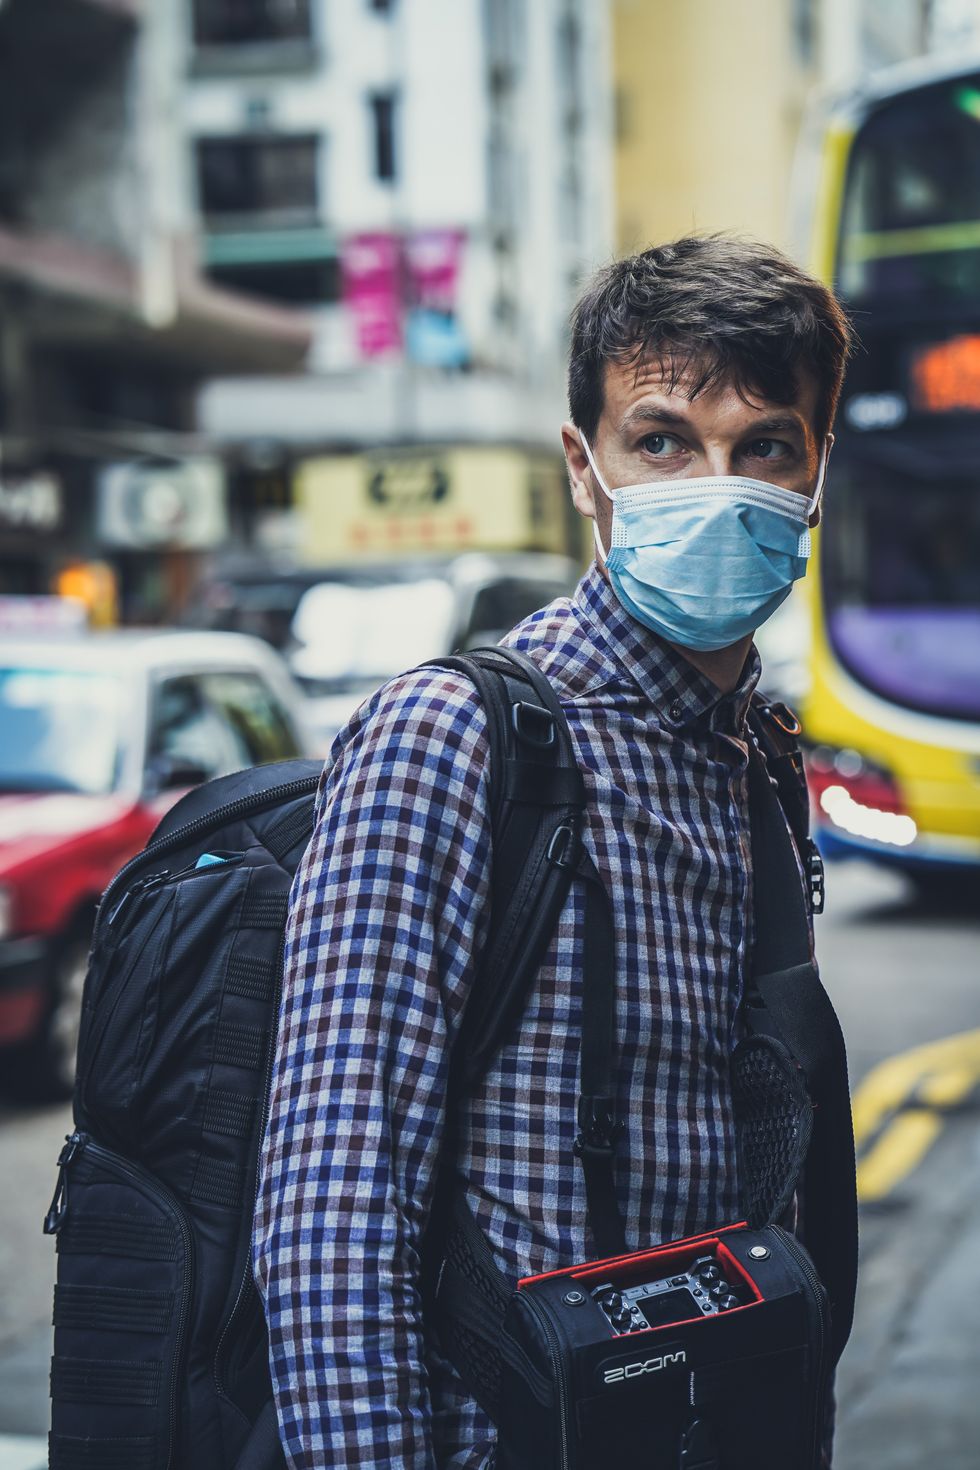 5 Positives To Pandemic Life